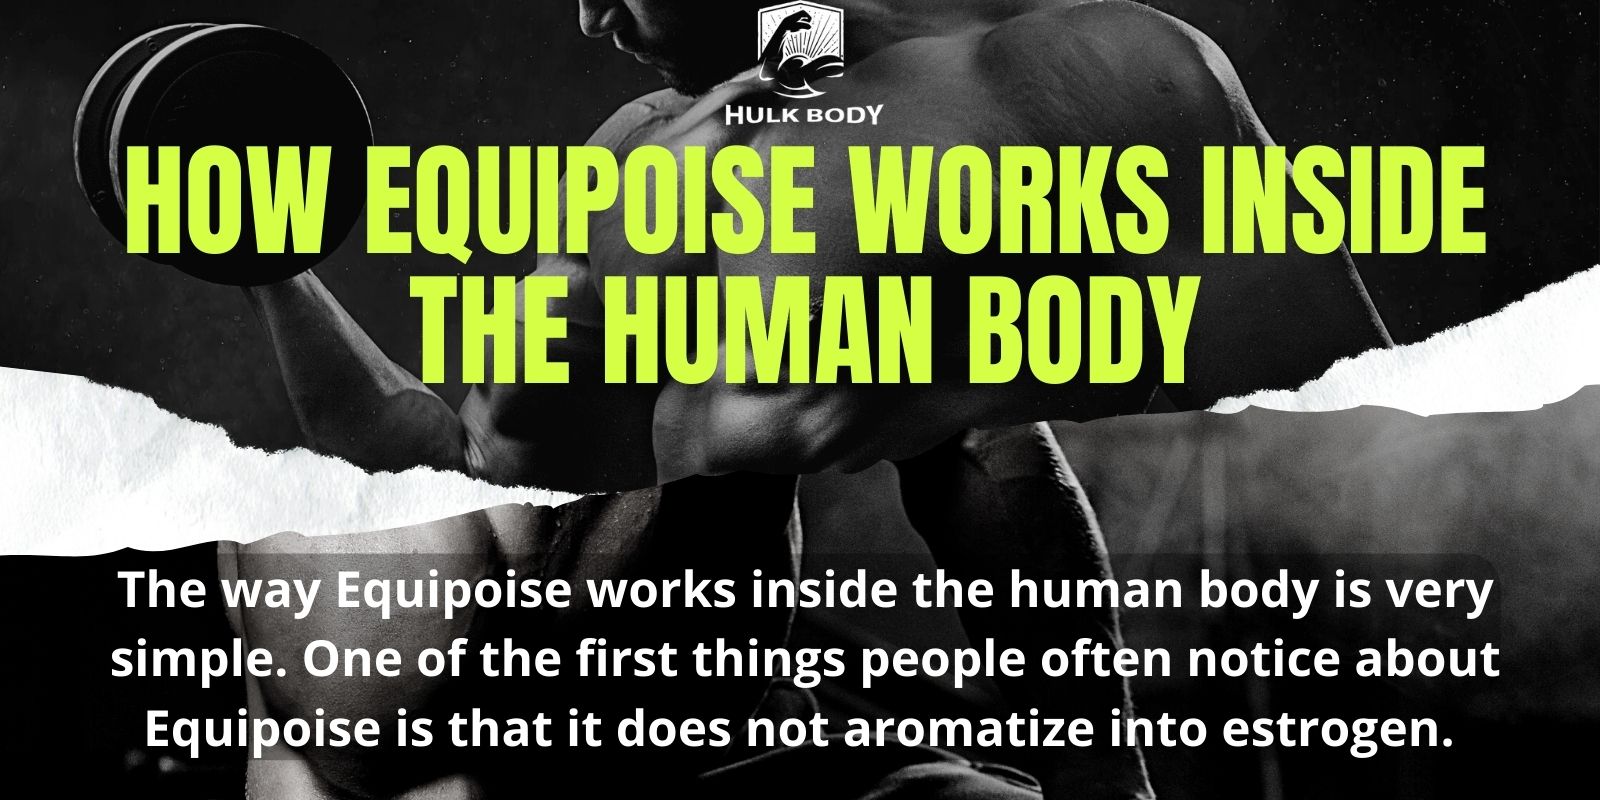 How Equipoise works inside the human body